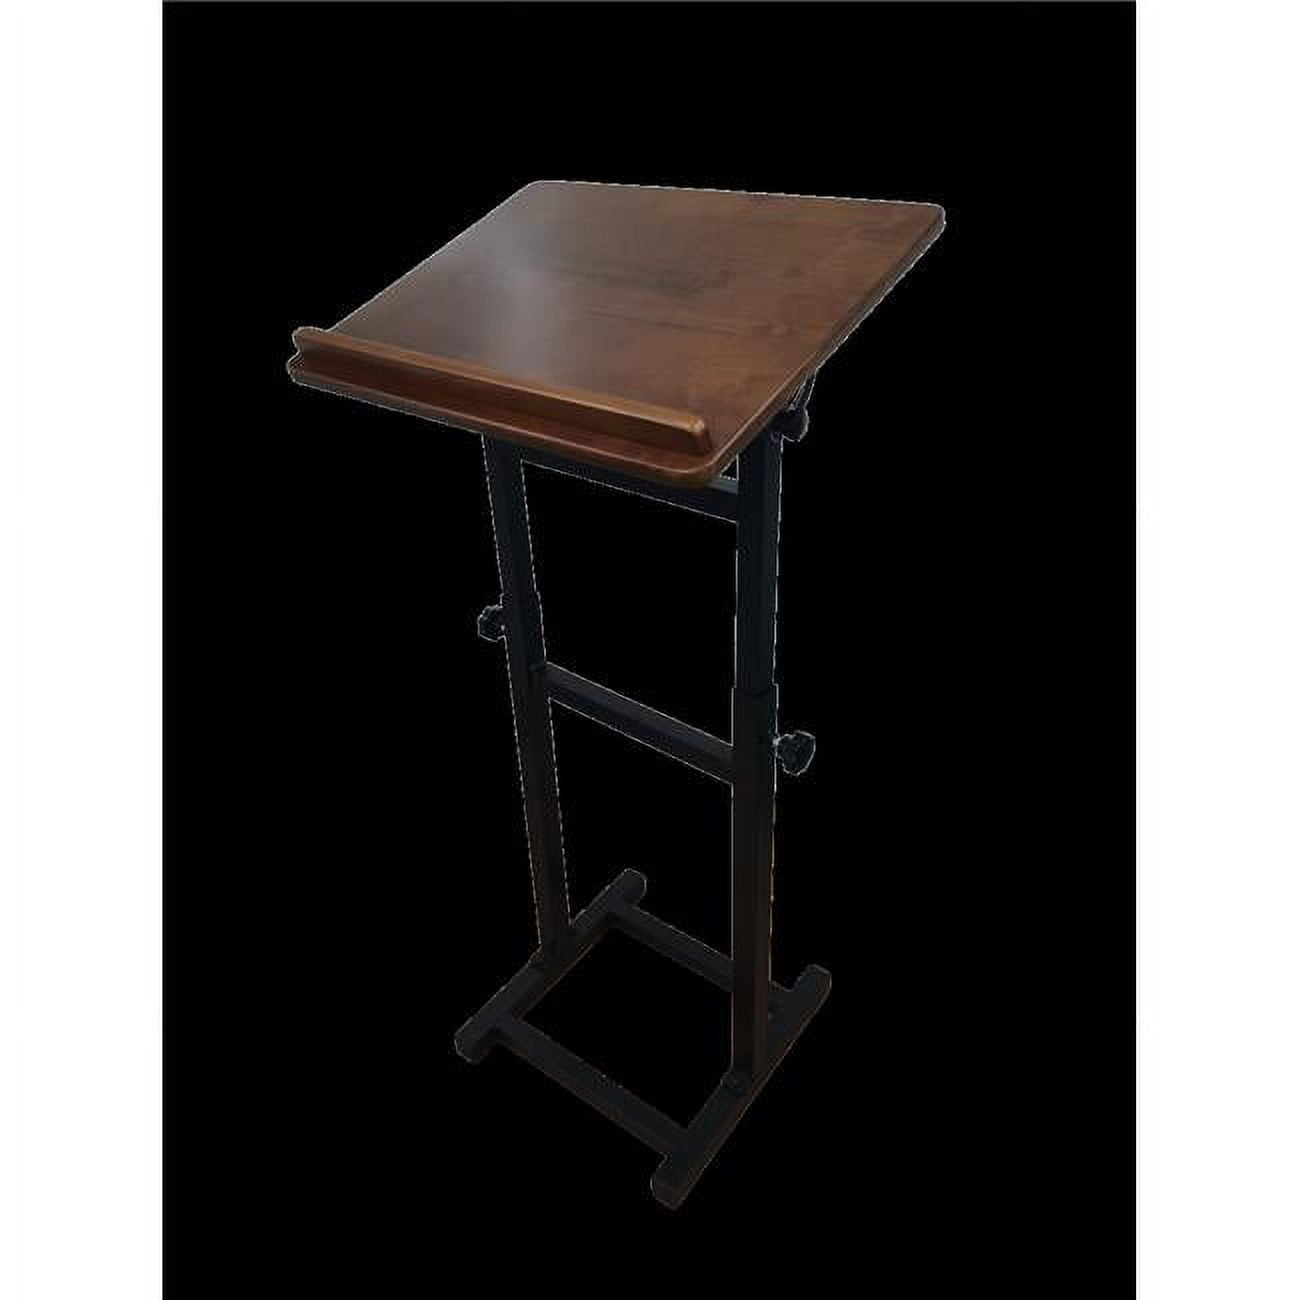 59801 Wooden Book Stand & Shtender, Walnut Oak - Adjustable Height Up to 43 in -  Nua